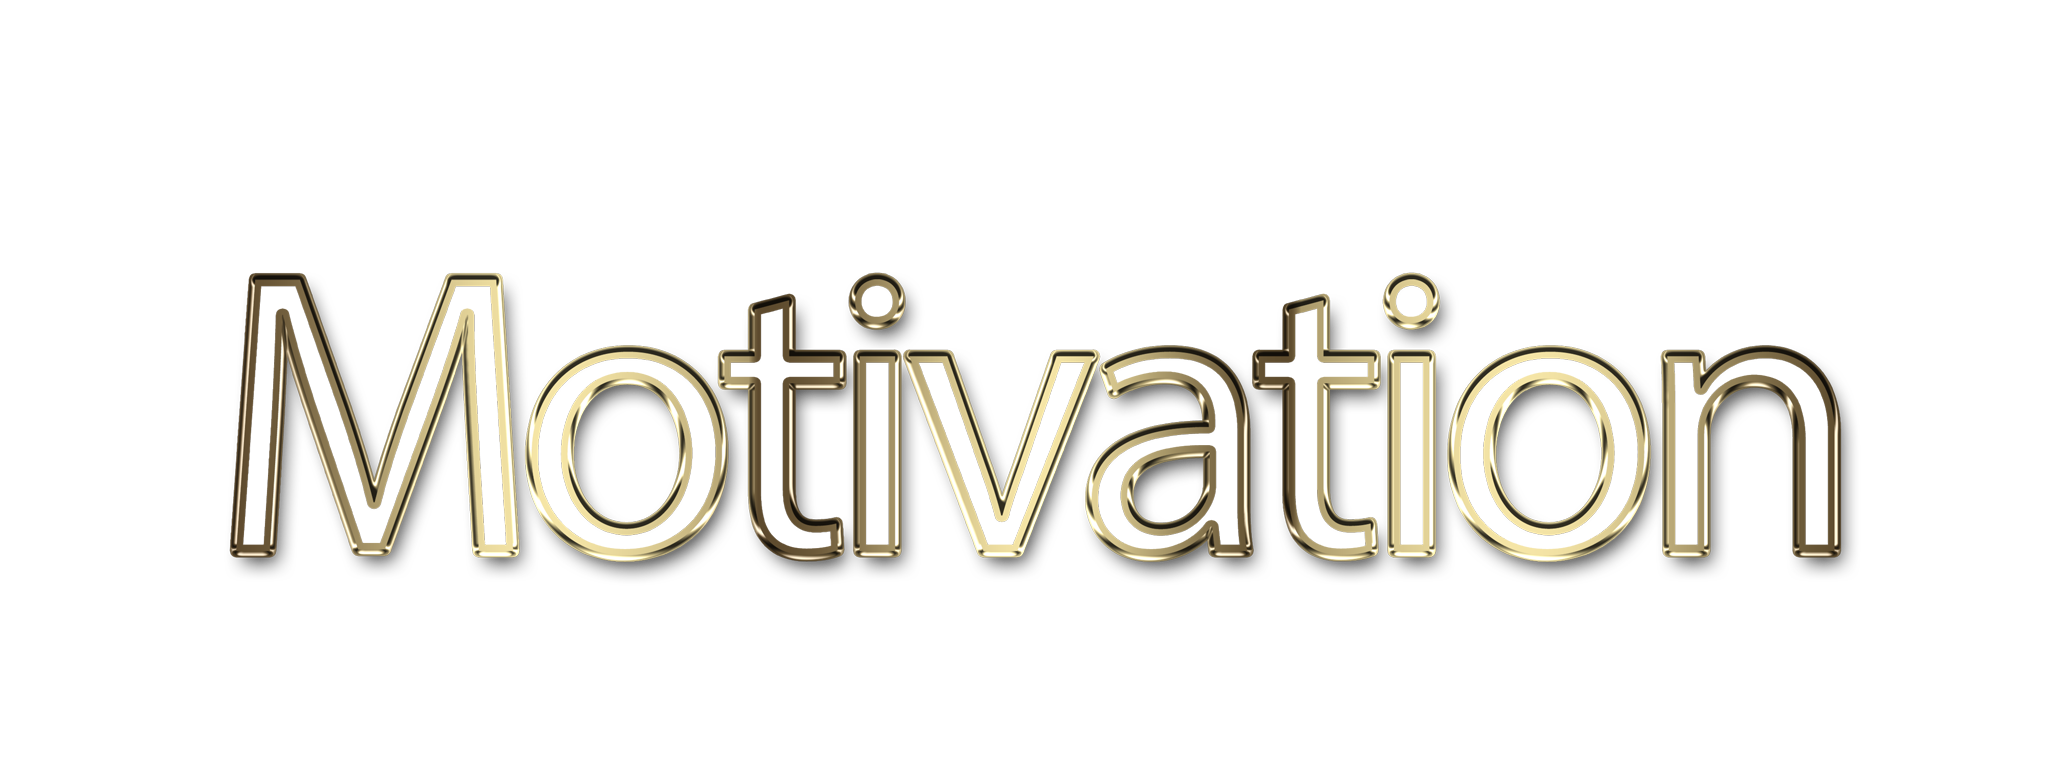 Motivation png, word Motivation png, Motivation word png, Motivation text png, Motivation letters png, Motivation word art typography PNG images, transparent png